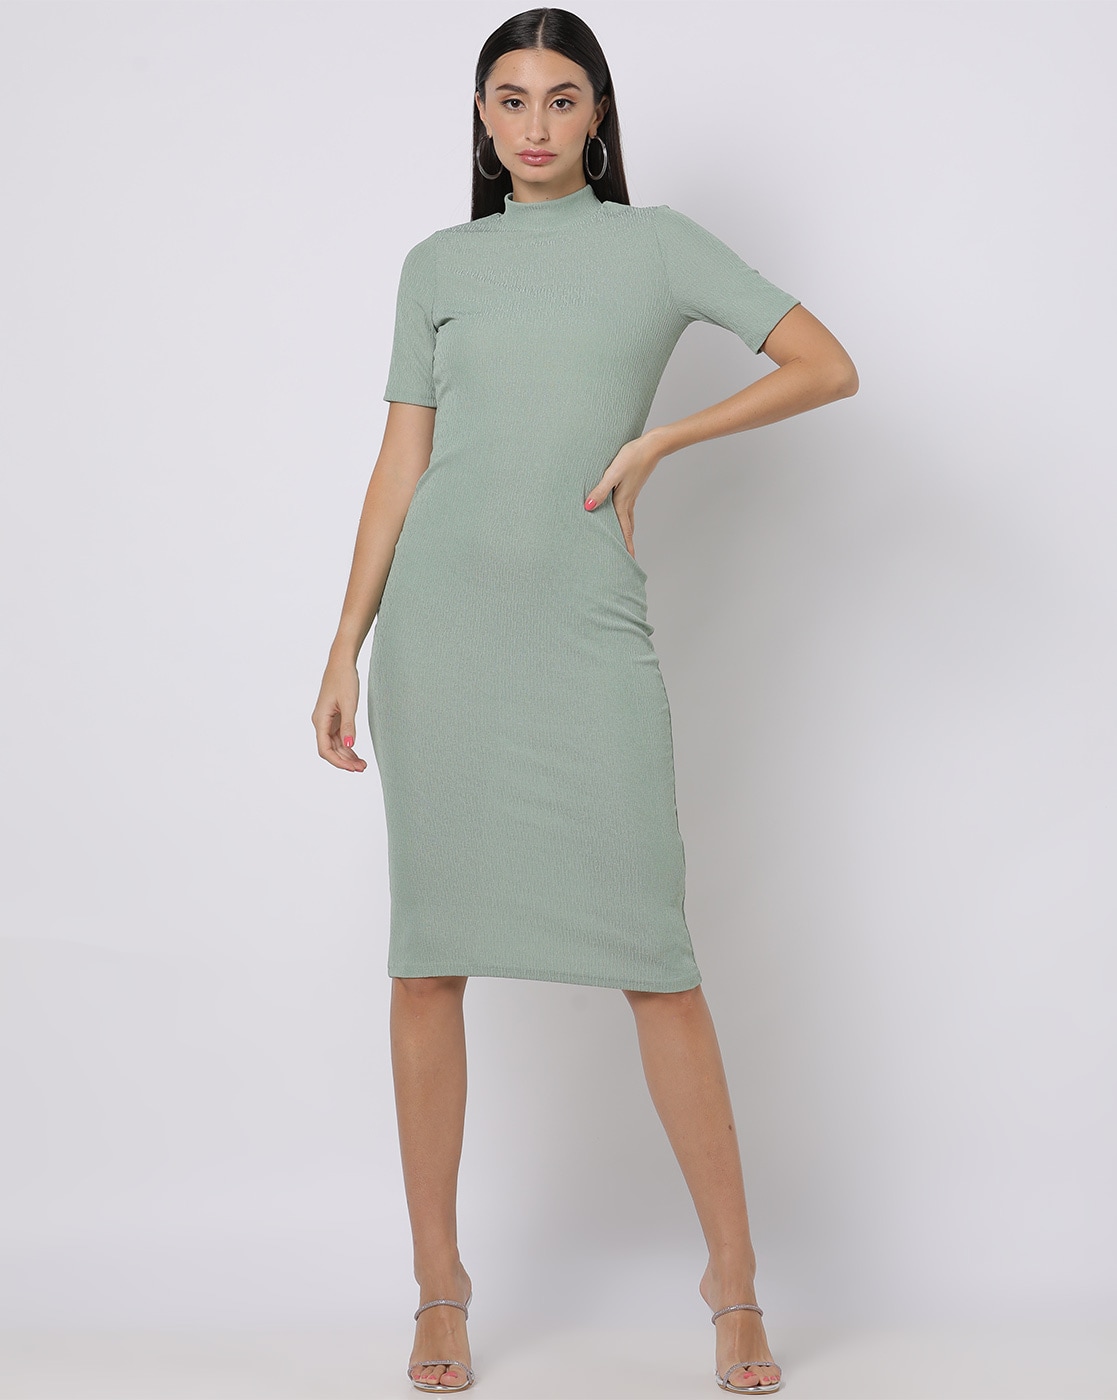 Buy Olive Dresses for Women by RIO Online